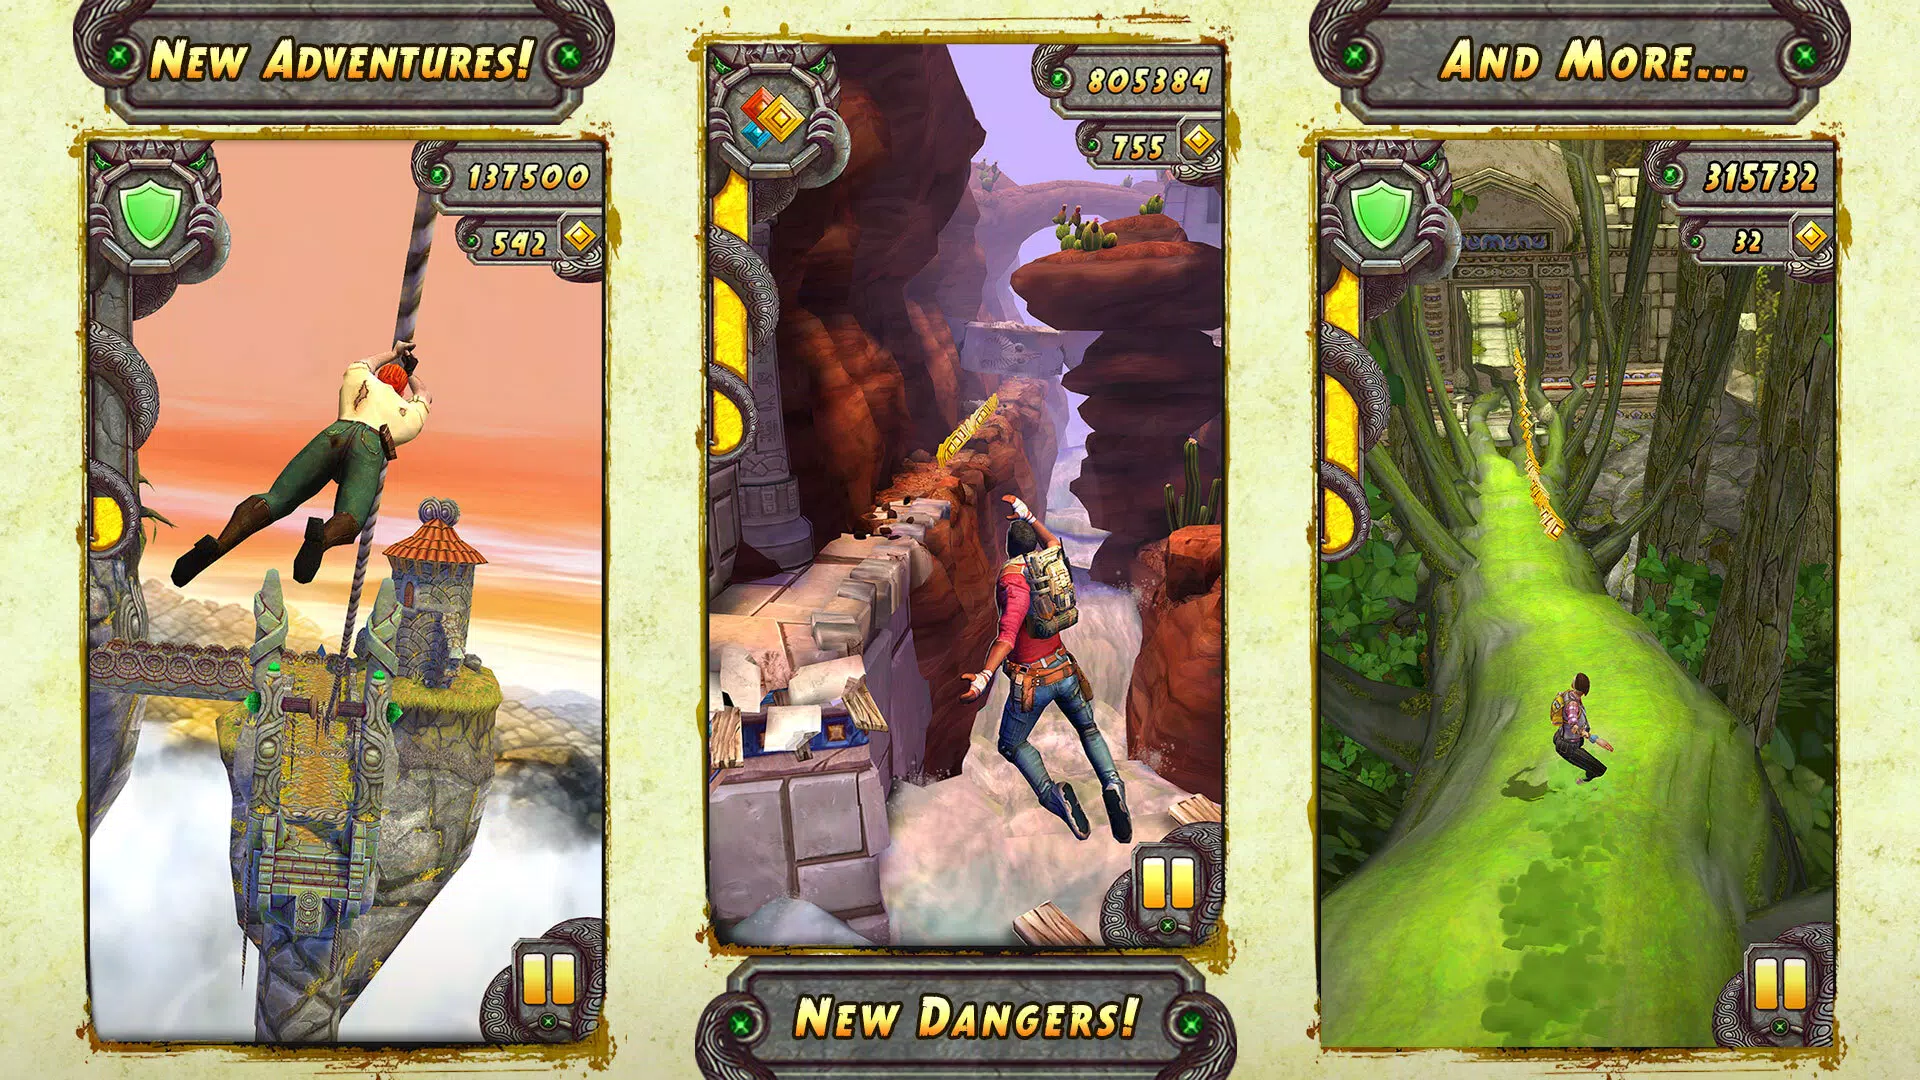 Temple Run 2 APK Download for Android Free